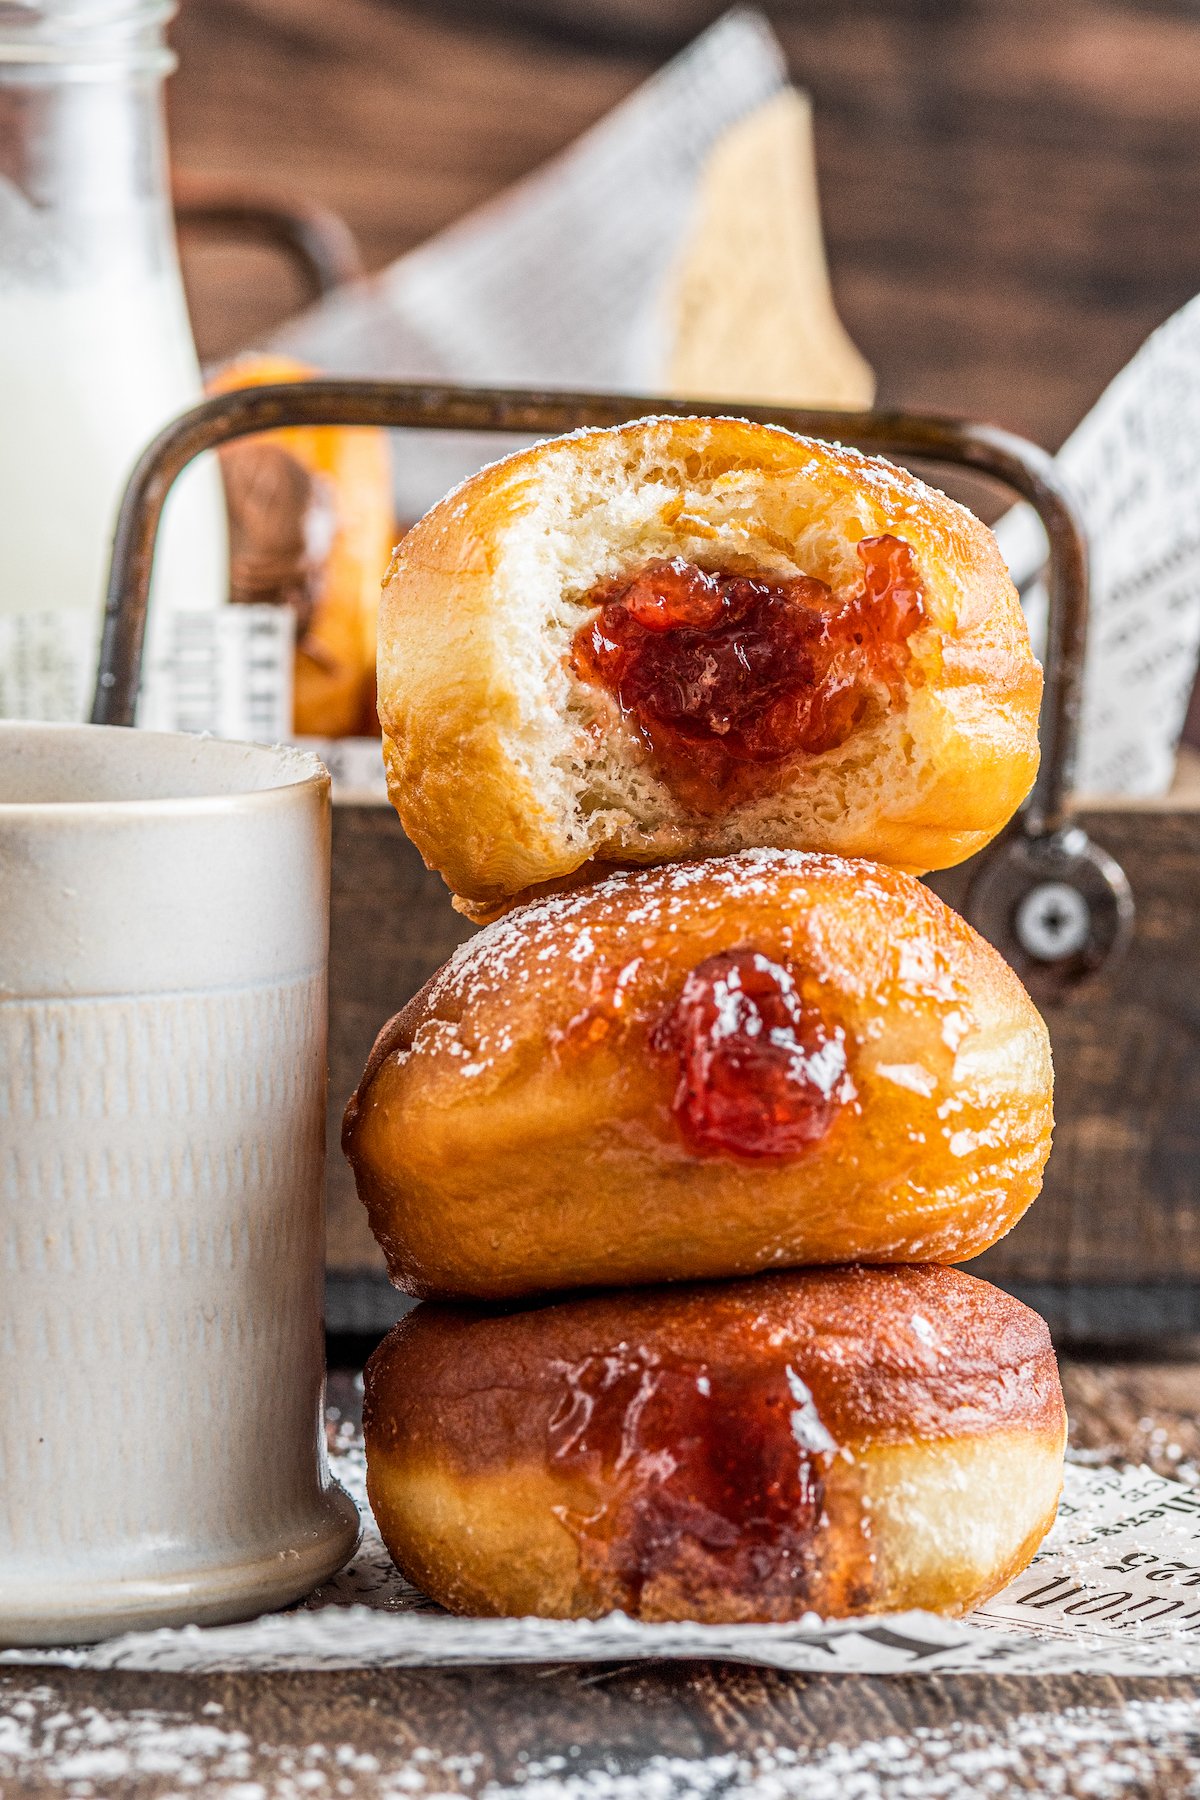 A stack of three jelly-filled donuts. A bite has been taken out of the top donut.